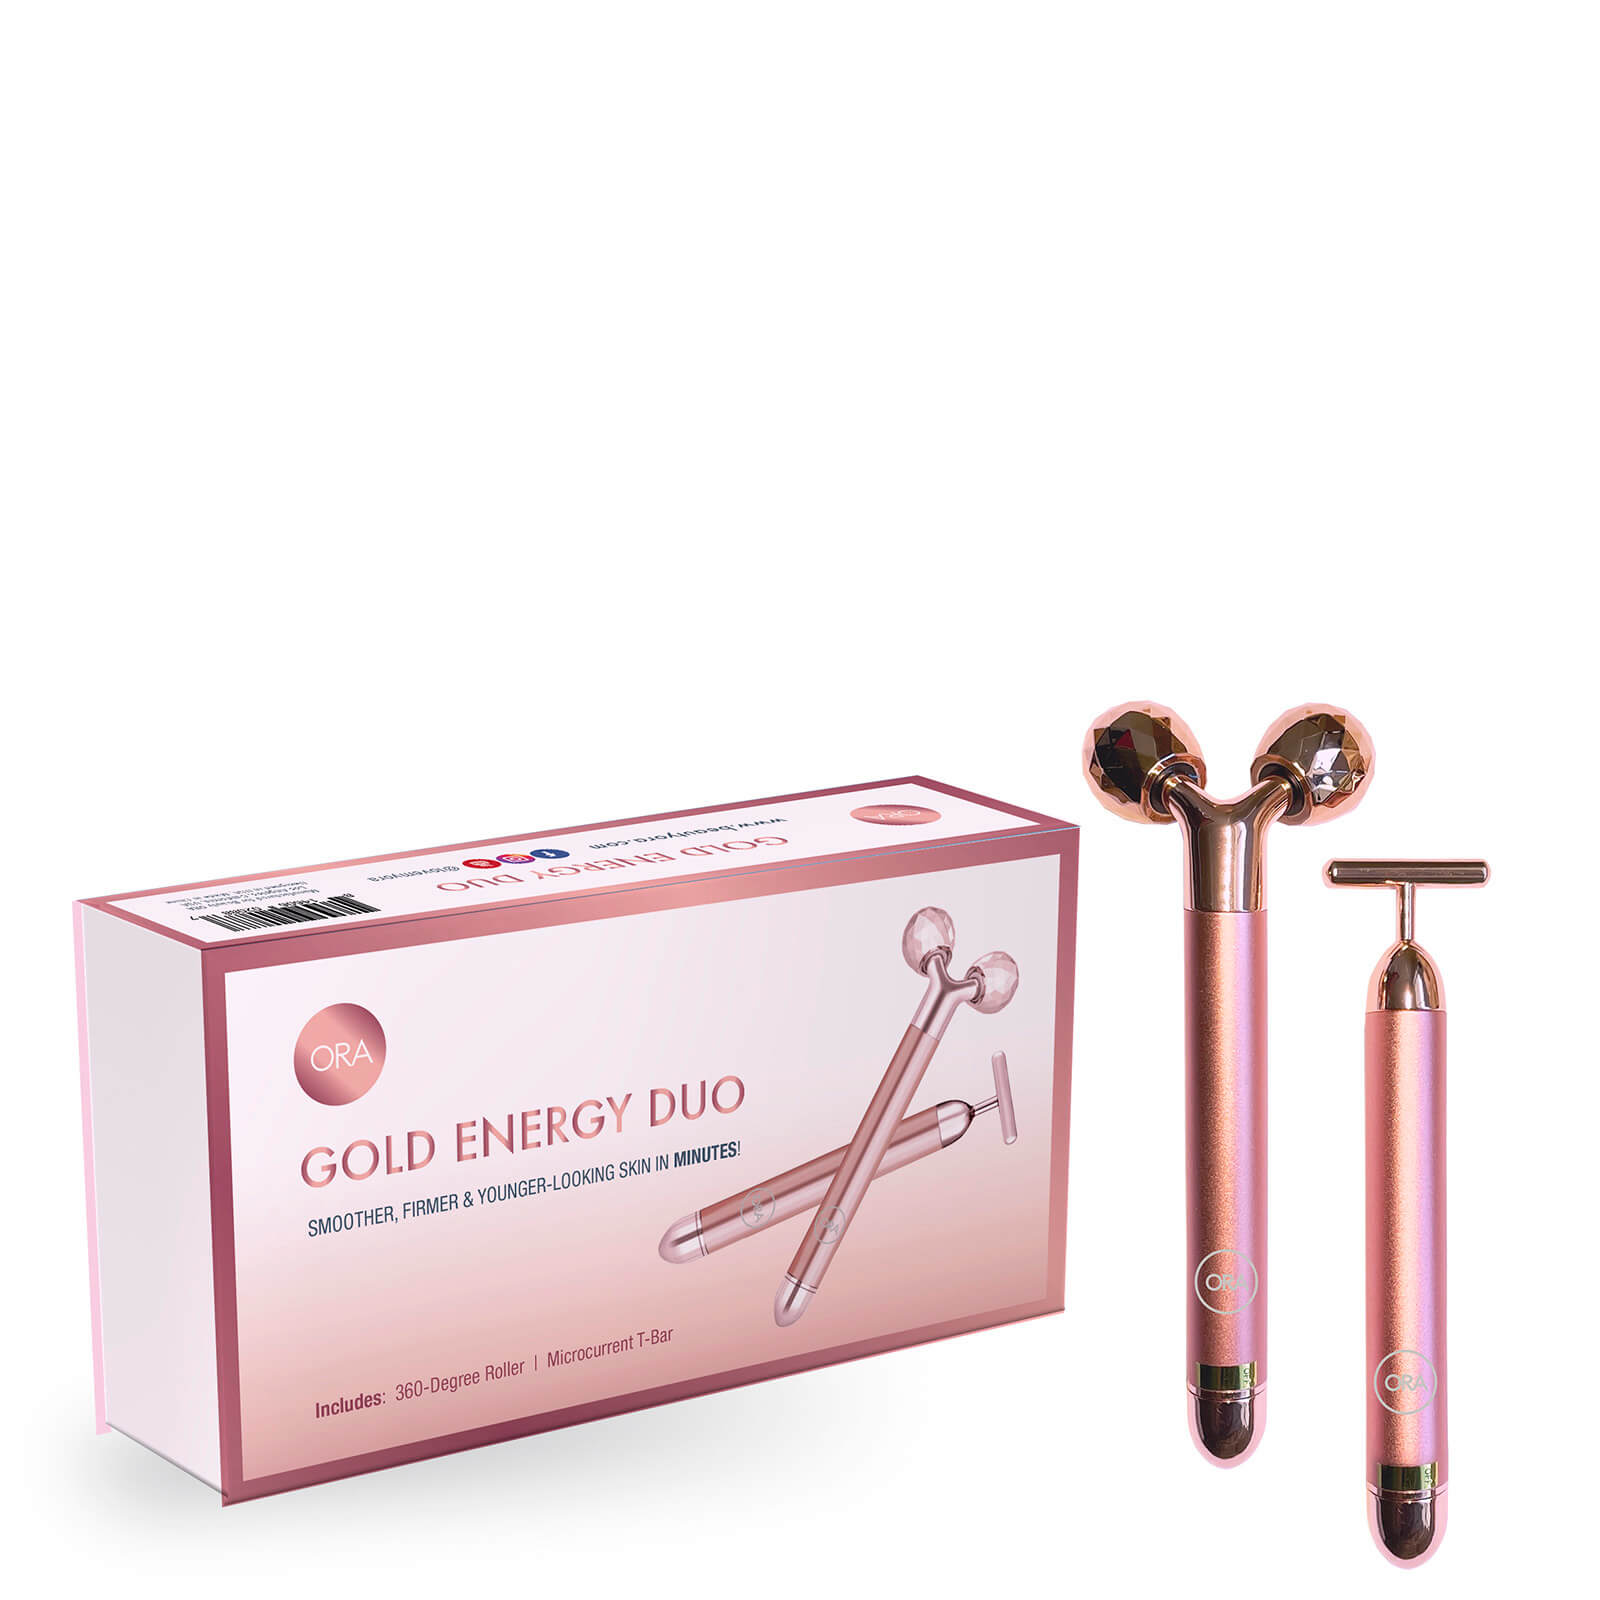 Beauty ORA 360-Degree Roller and Microcurrent T-Bar Deluxe Set - Rose Gold